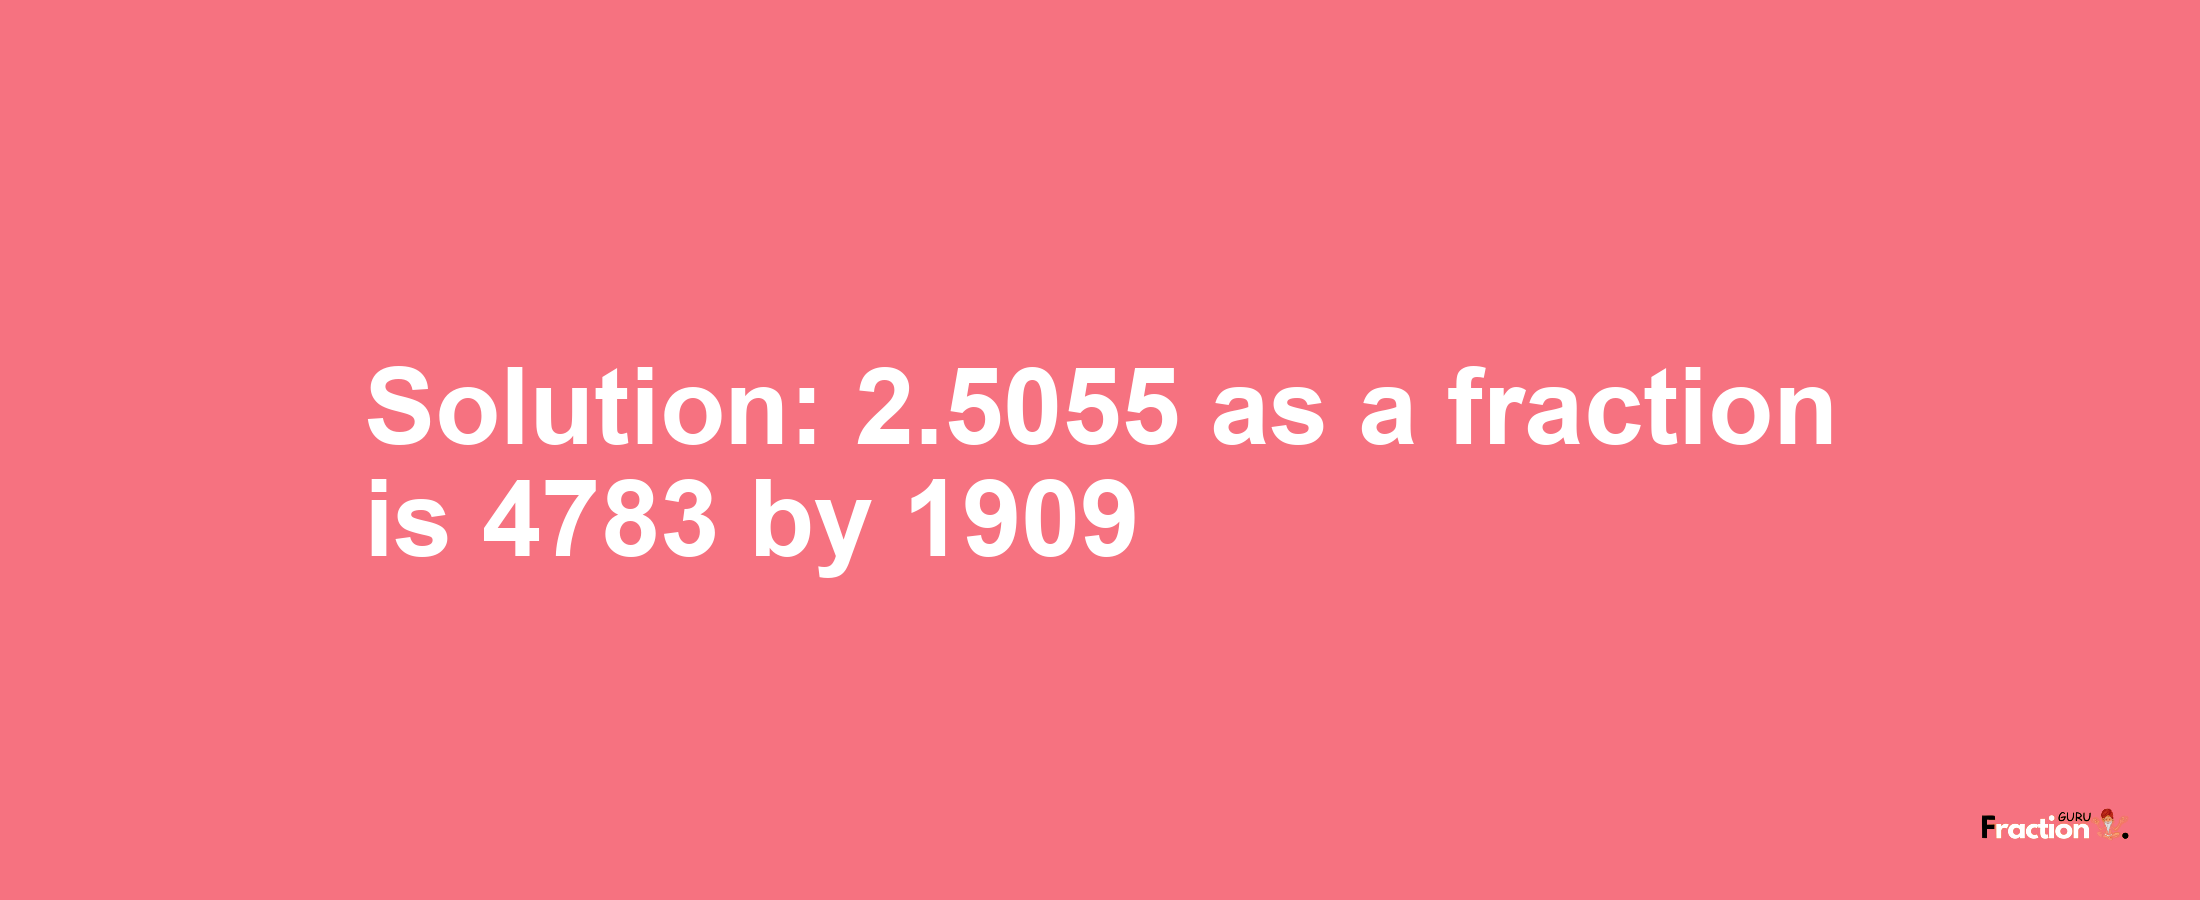 Solution:2.5055 as a fraction is 4783/1909